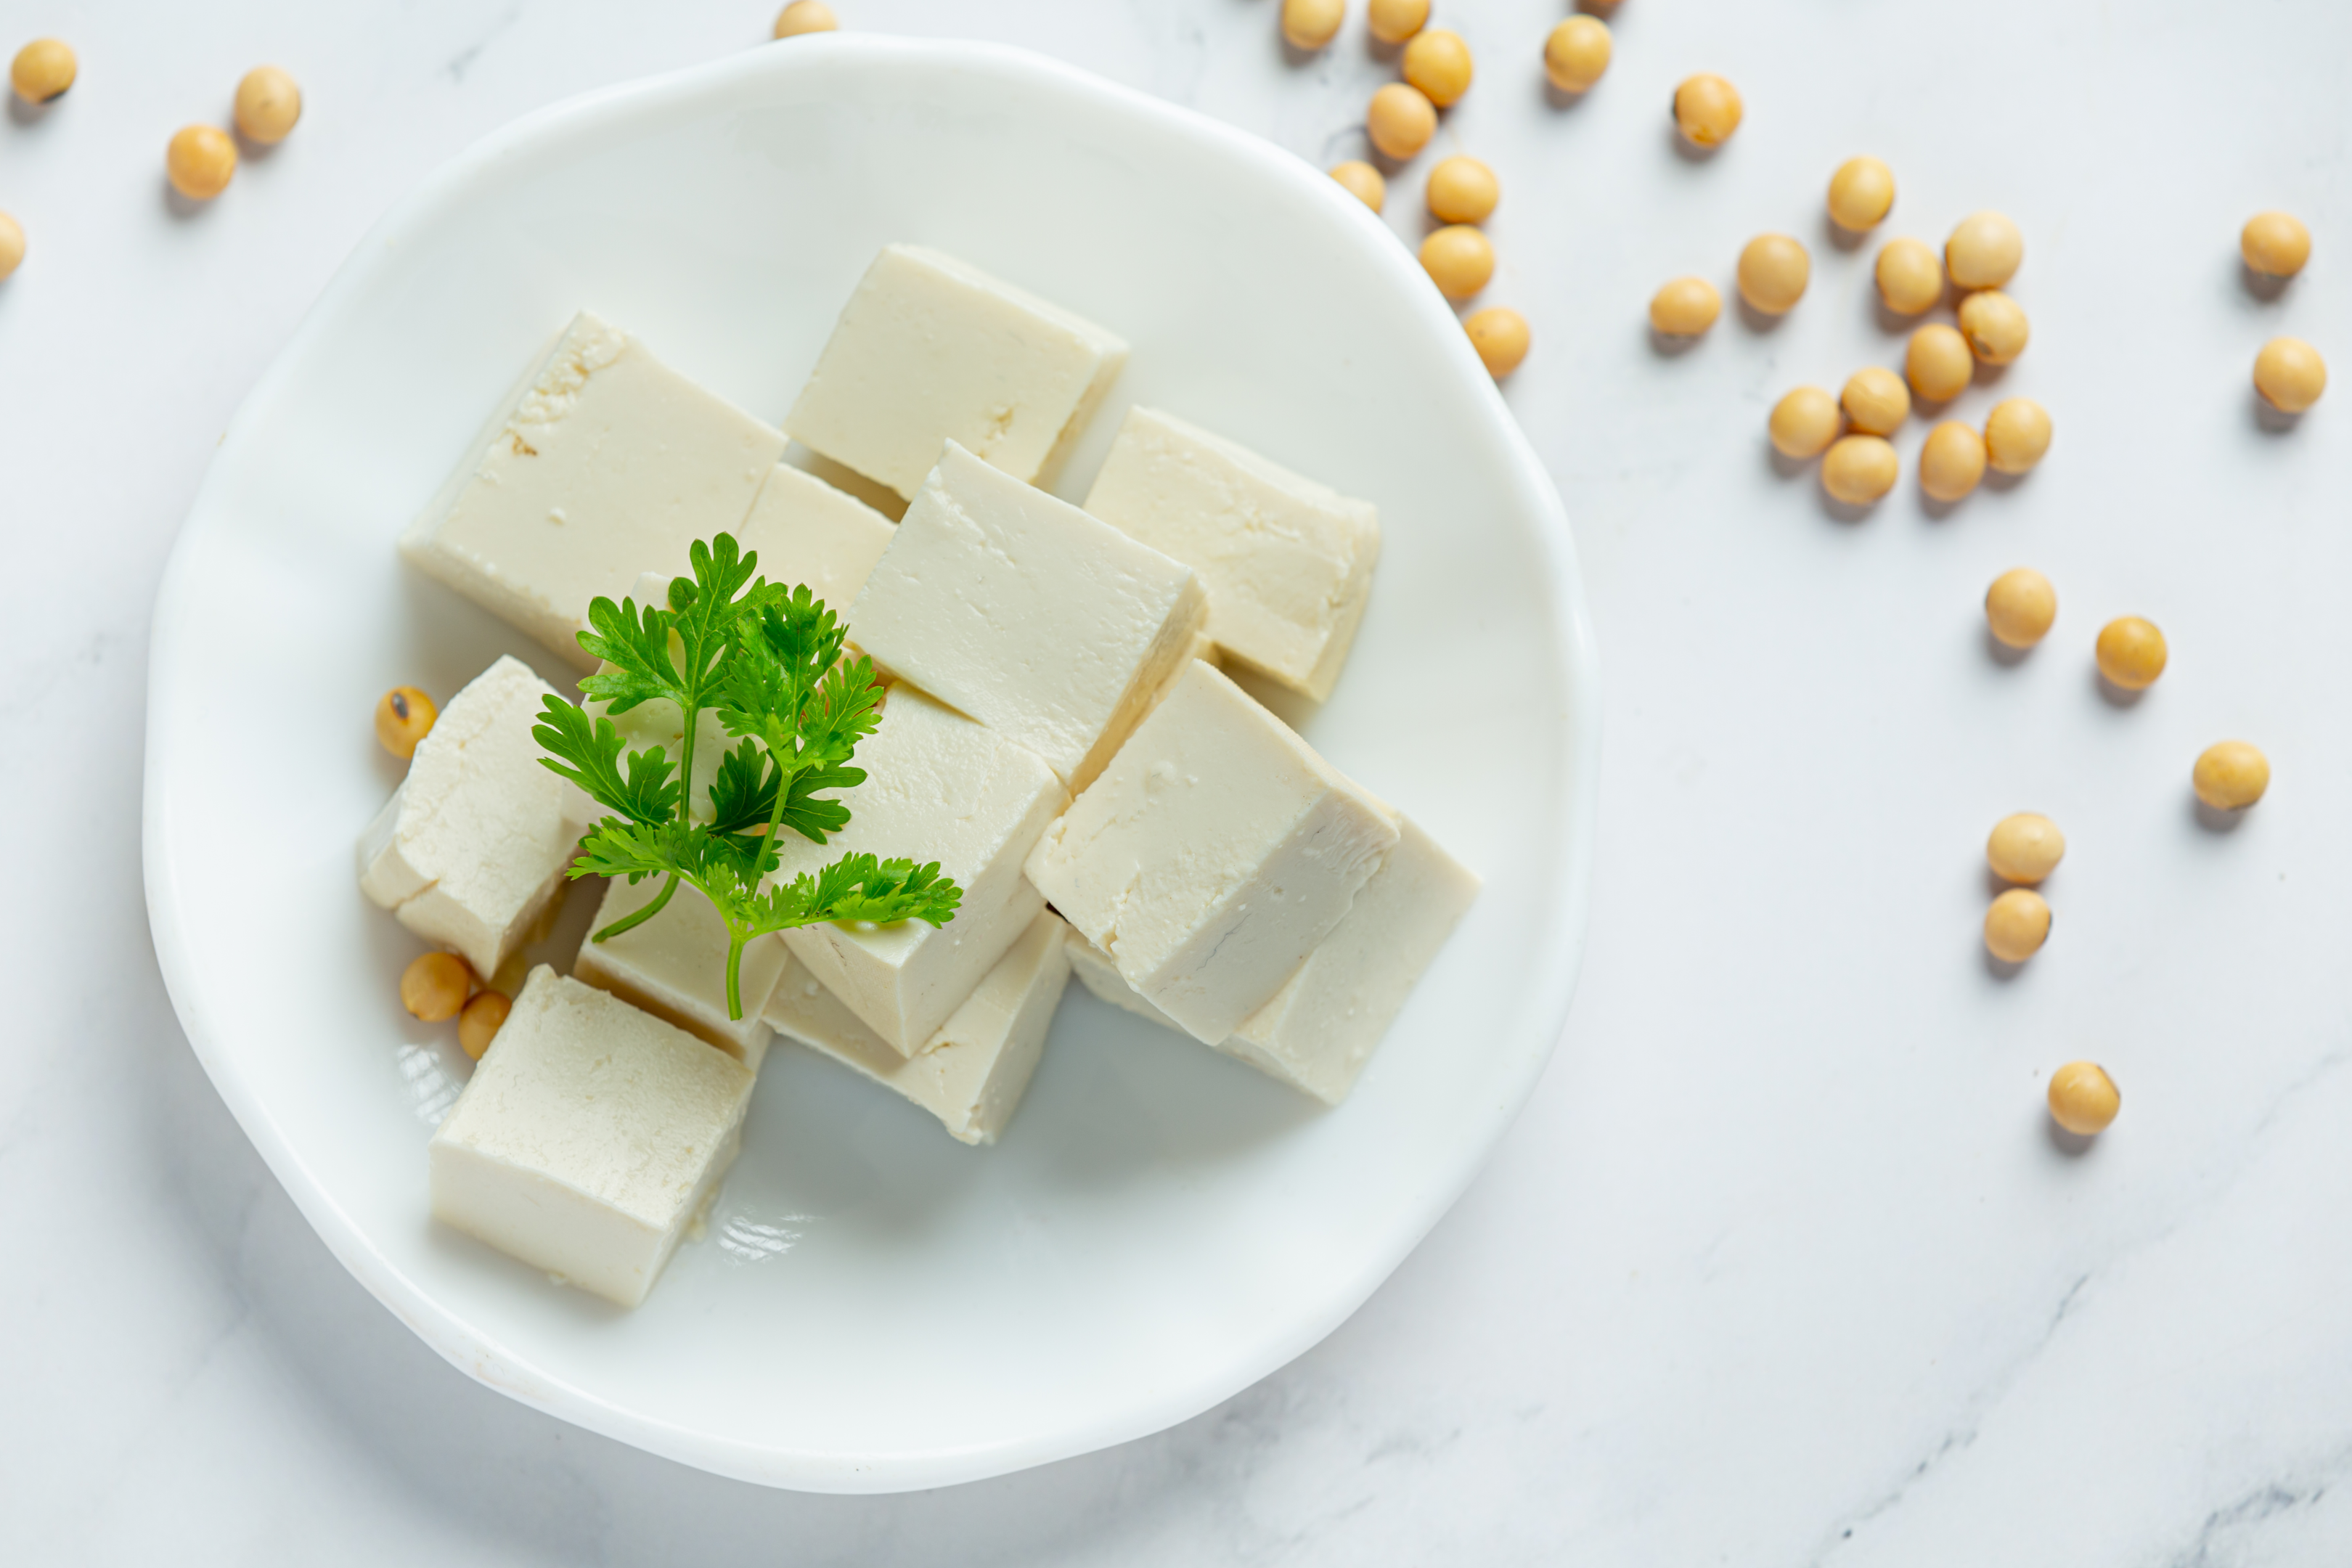 Raw paneer cubes arranged on a plate, prepared for marination to make delicious paneer butter masala.